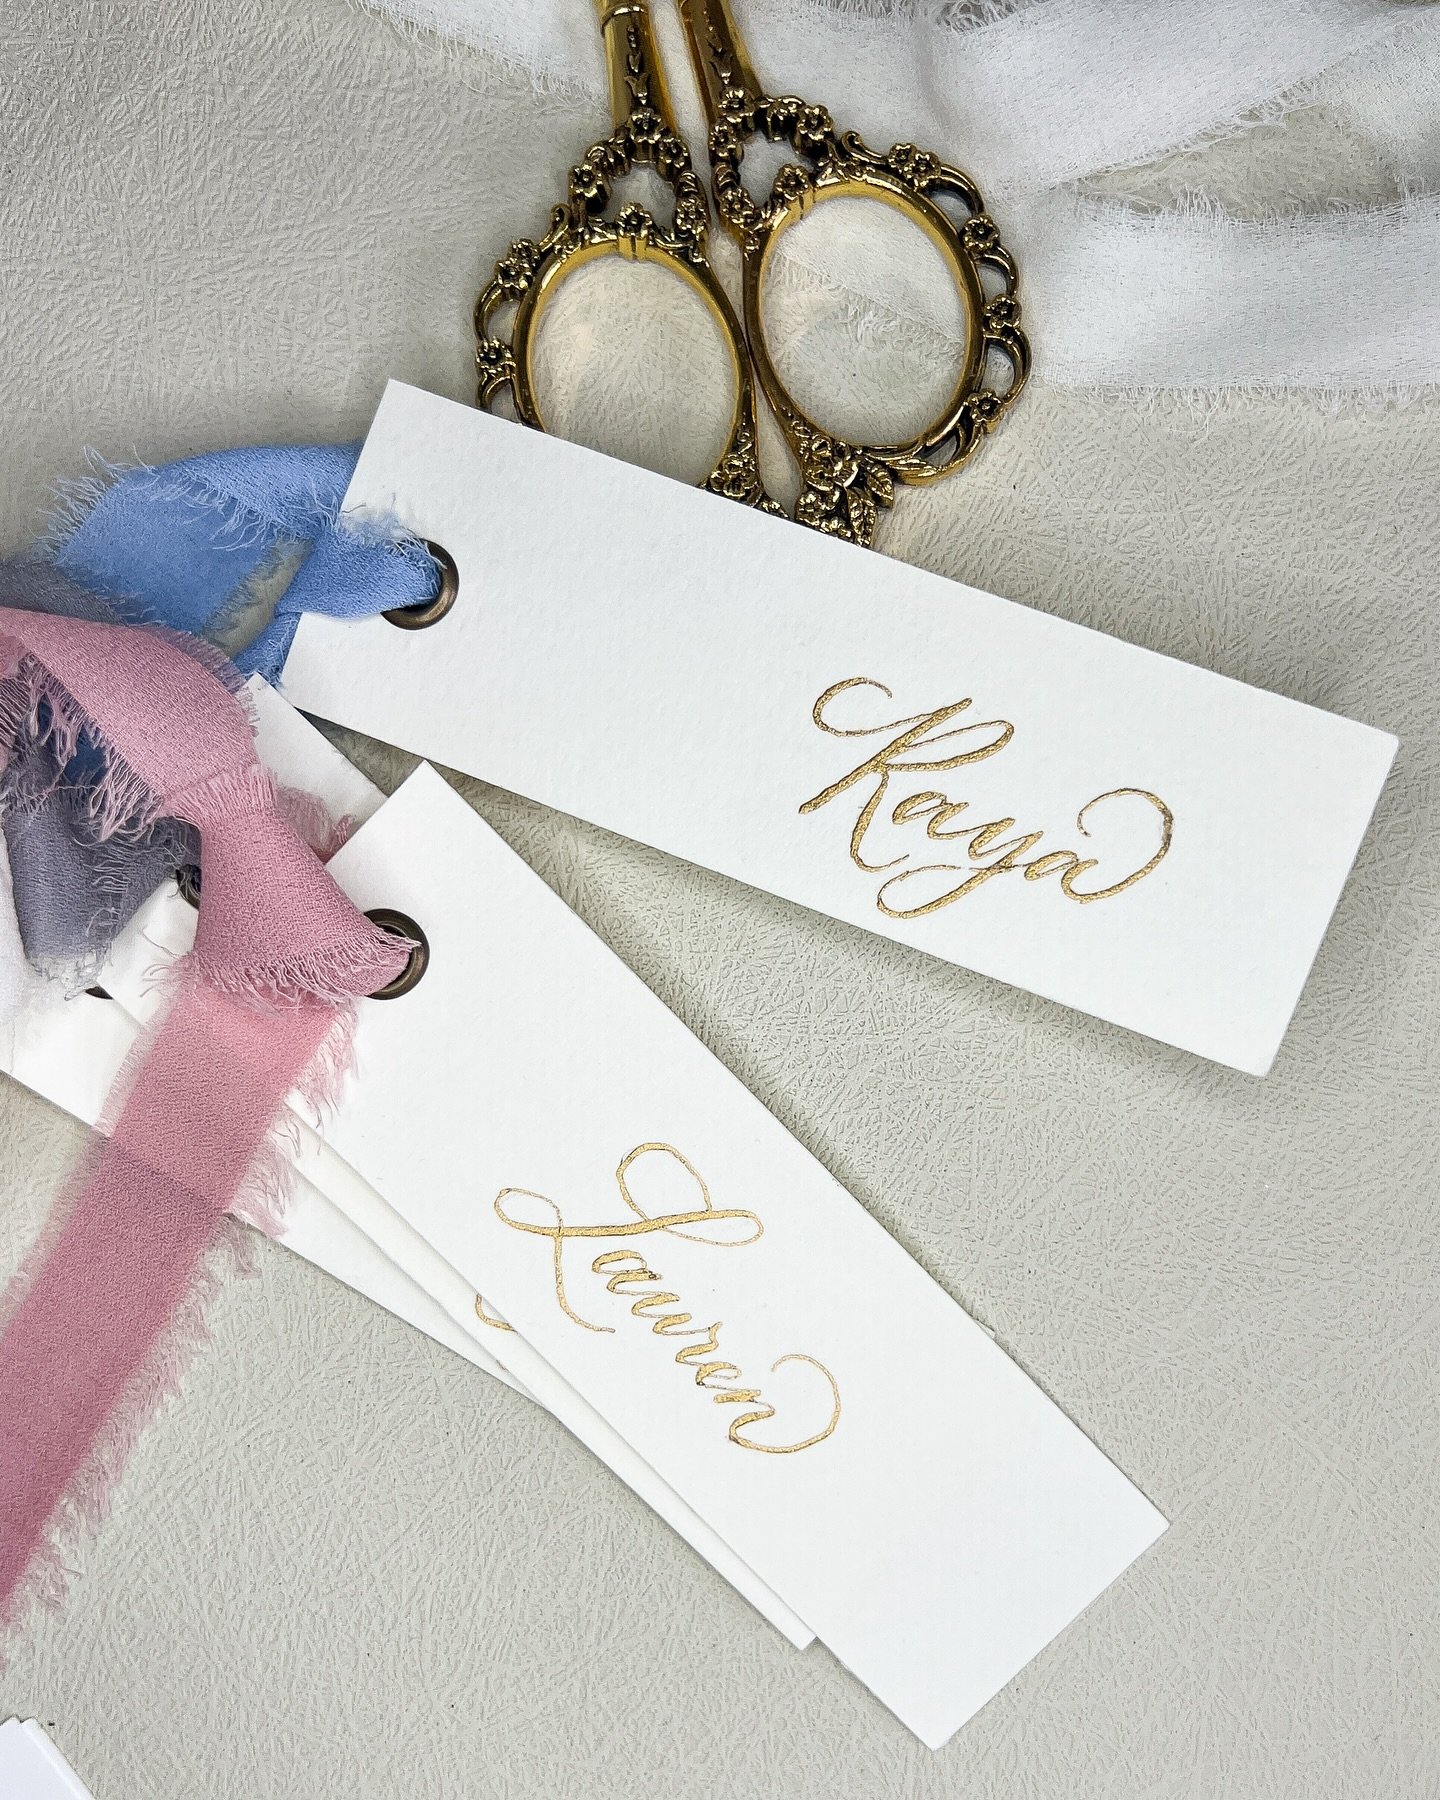 Elevate your event with my stunning new place card/ name tag design! Each meticulously crafted card adds a touch of sophistication and style to your table setting, setting the stage for an unforgettable celebration. Make every guest feel like a VIP w